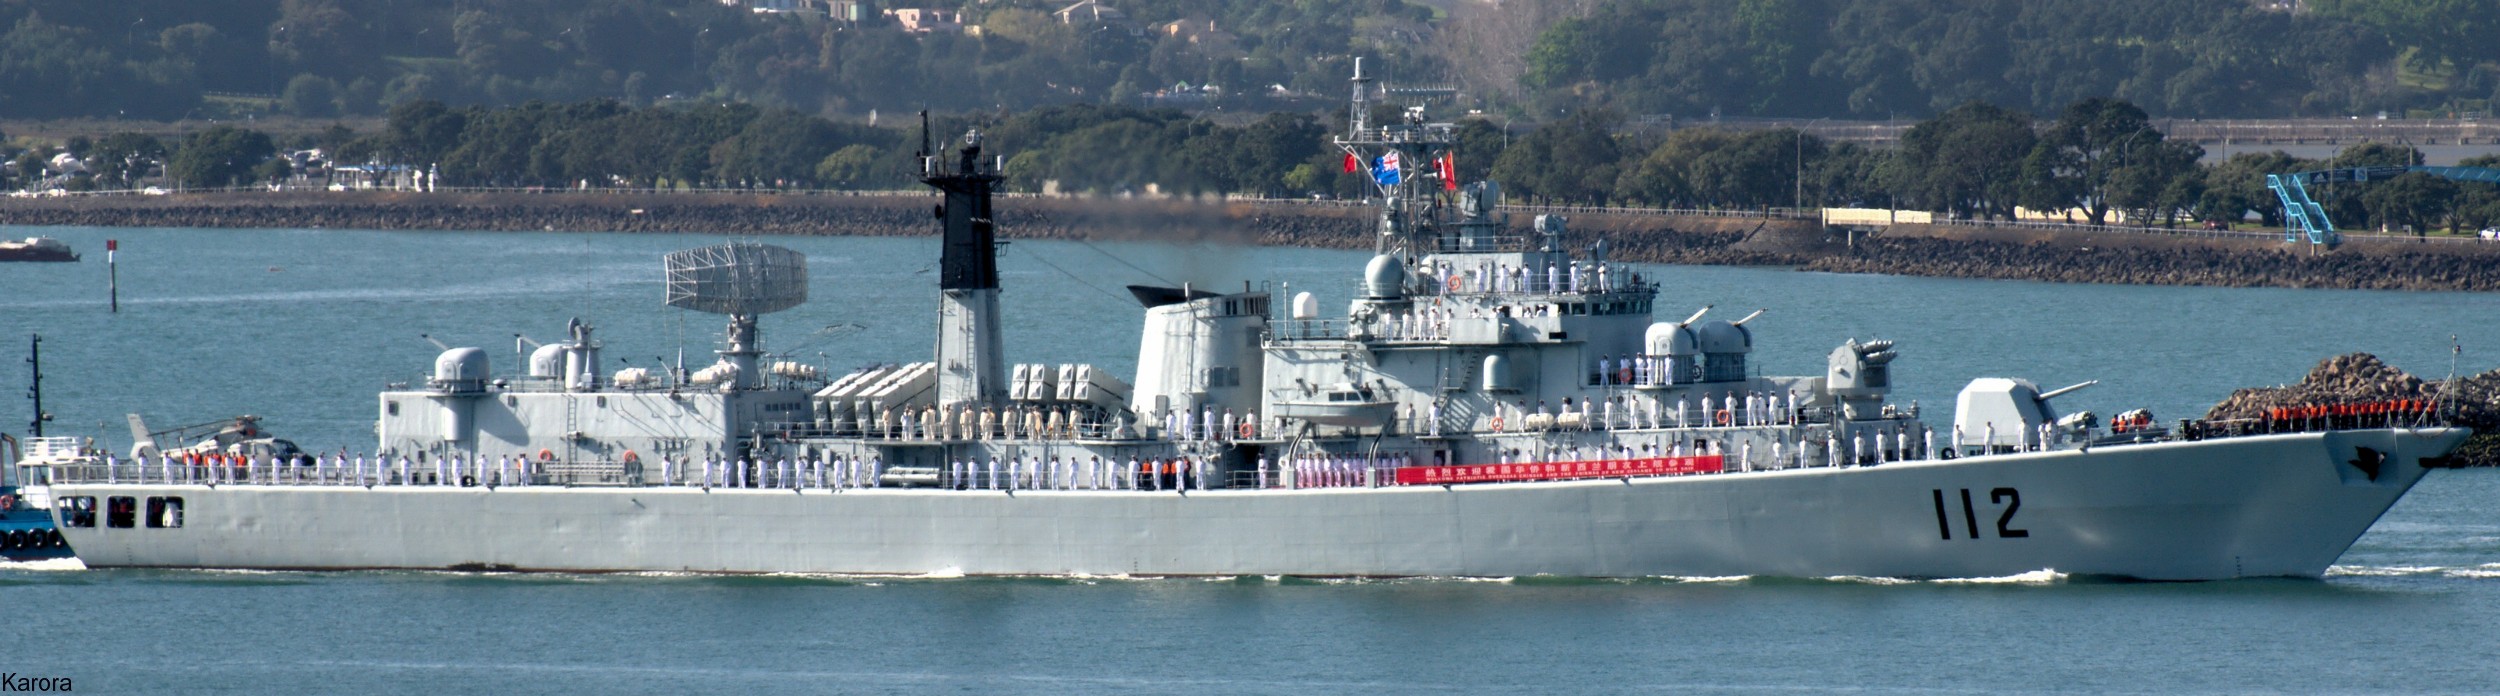 ddg-112 plans harbin type 052 luhu class guided missile destroyer china peoples liberation army navy plan 03